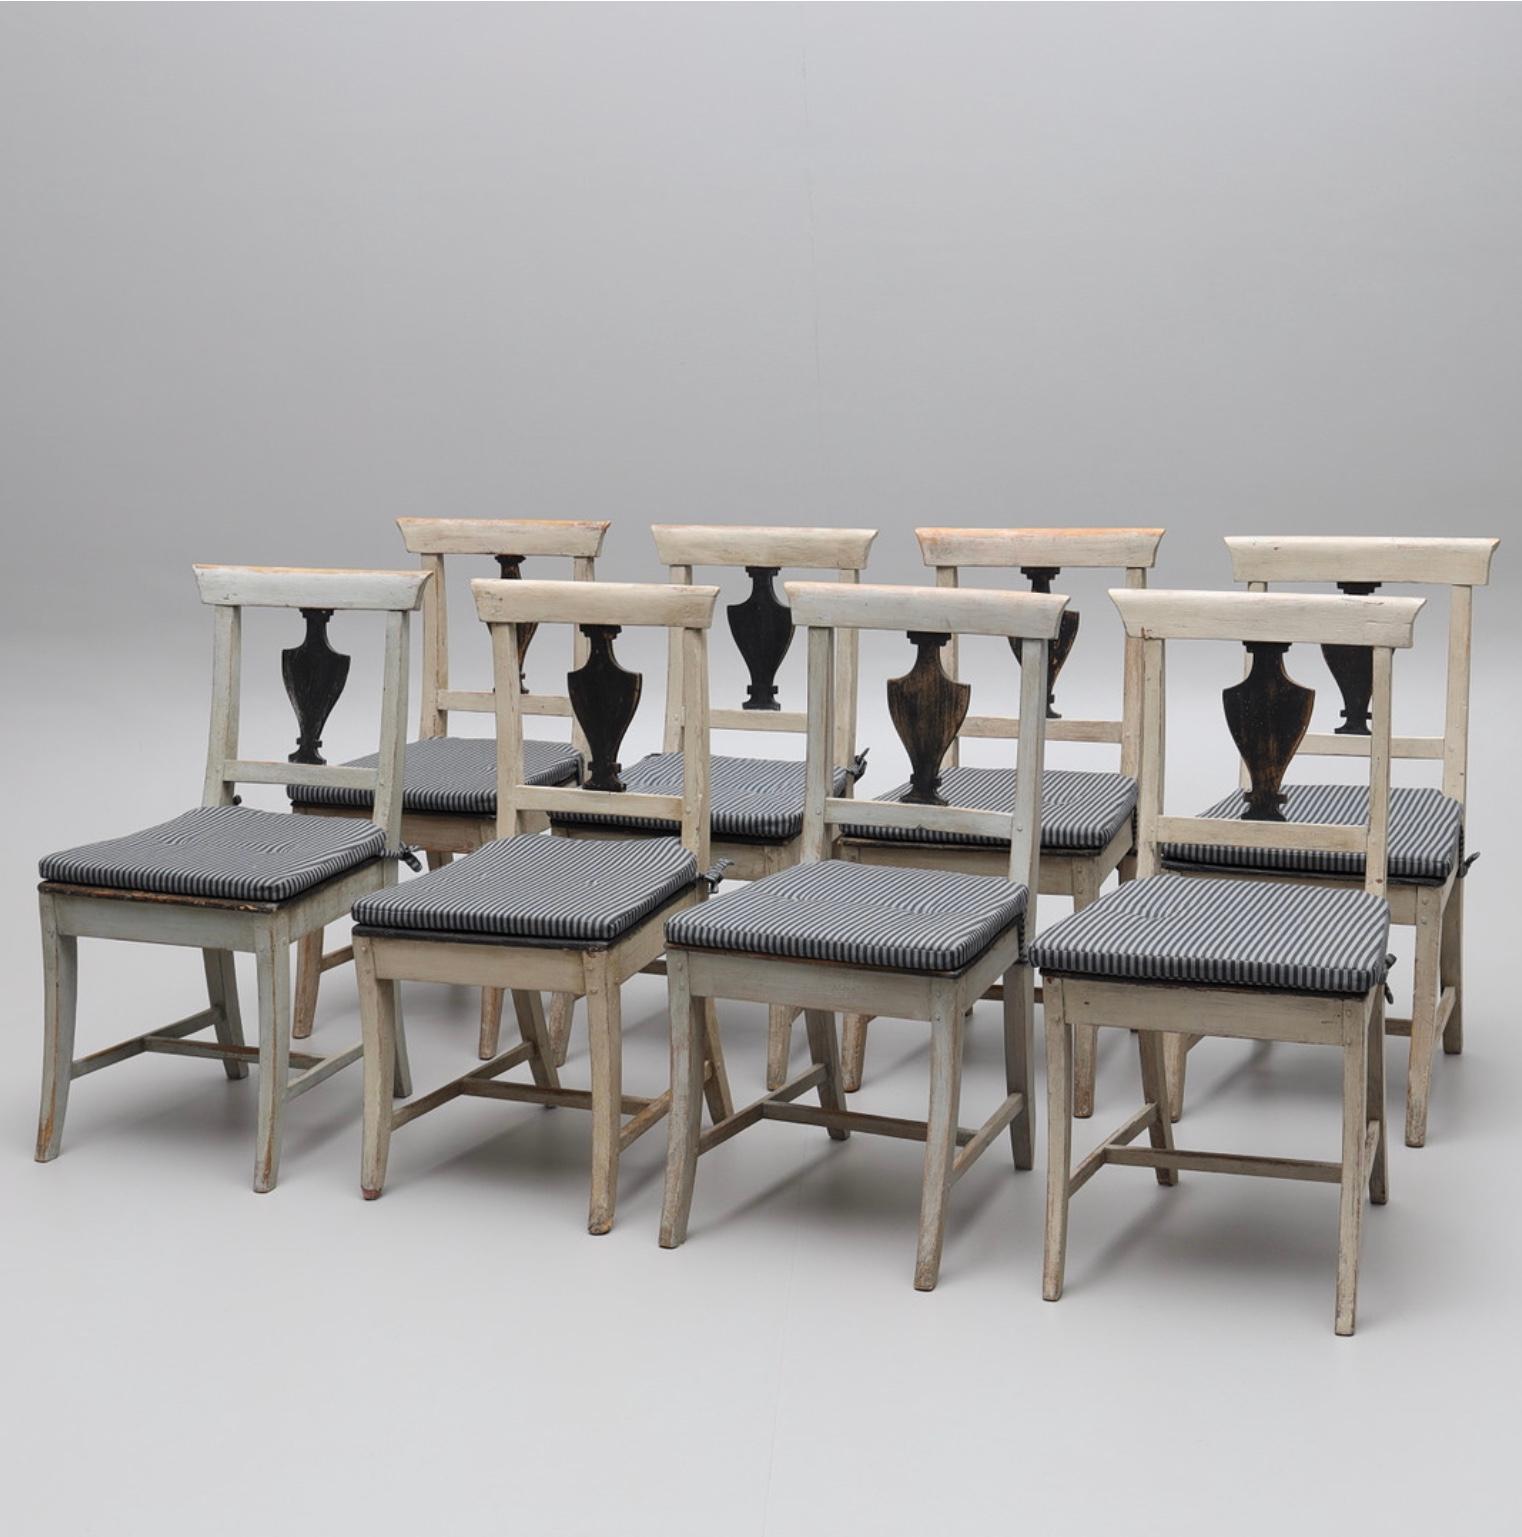 Painted Set of 8 Swedish Mid 19th Century Dining Chairs with Decorative Urn Detail 